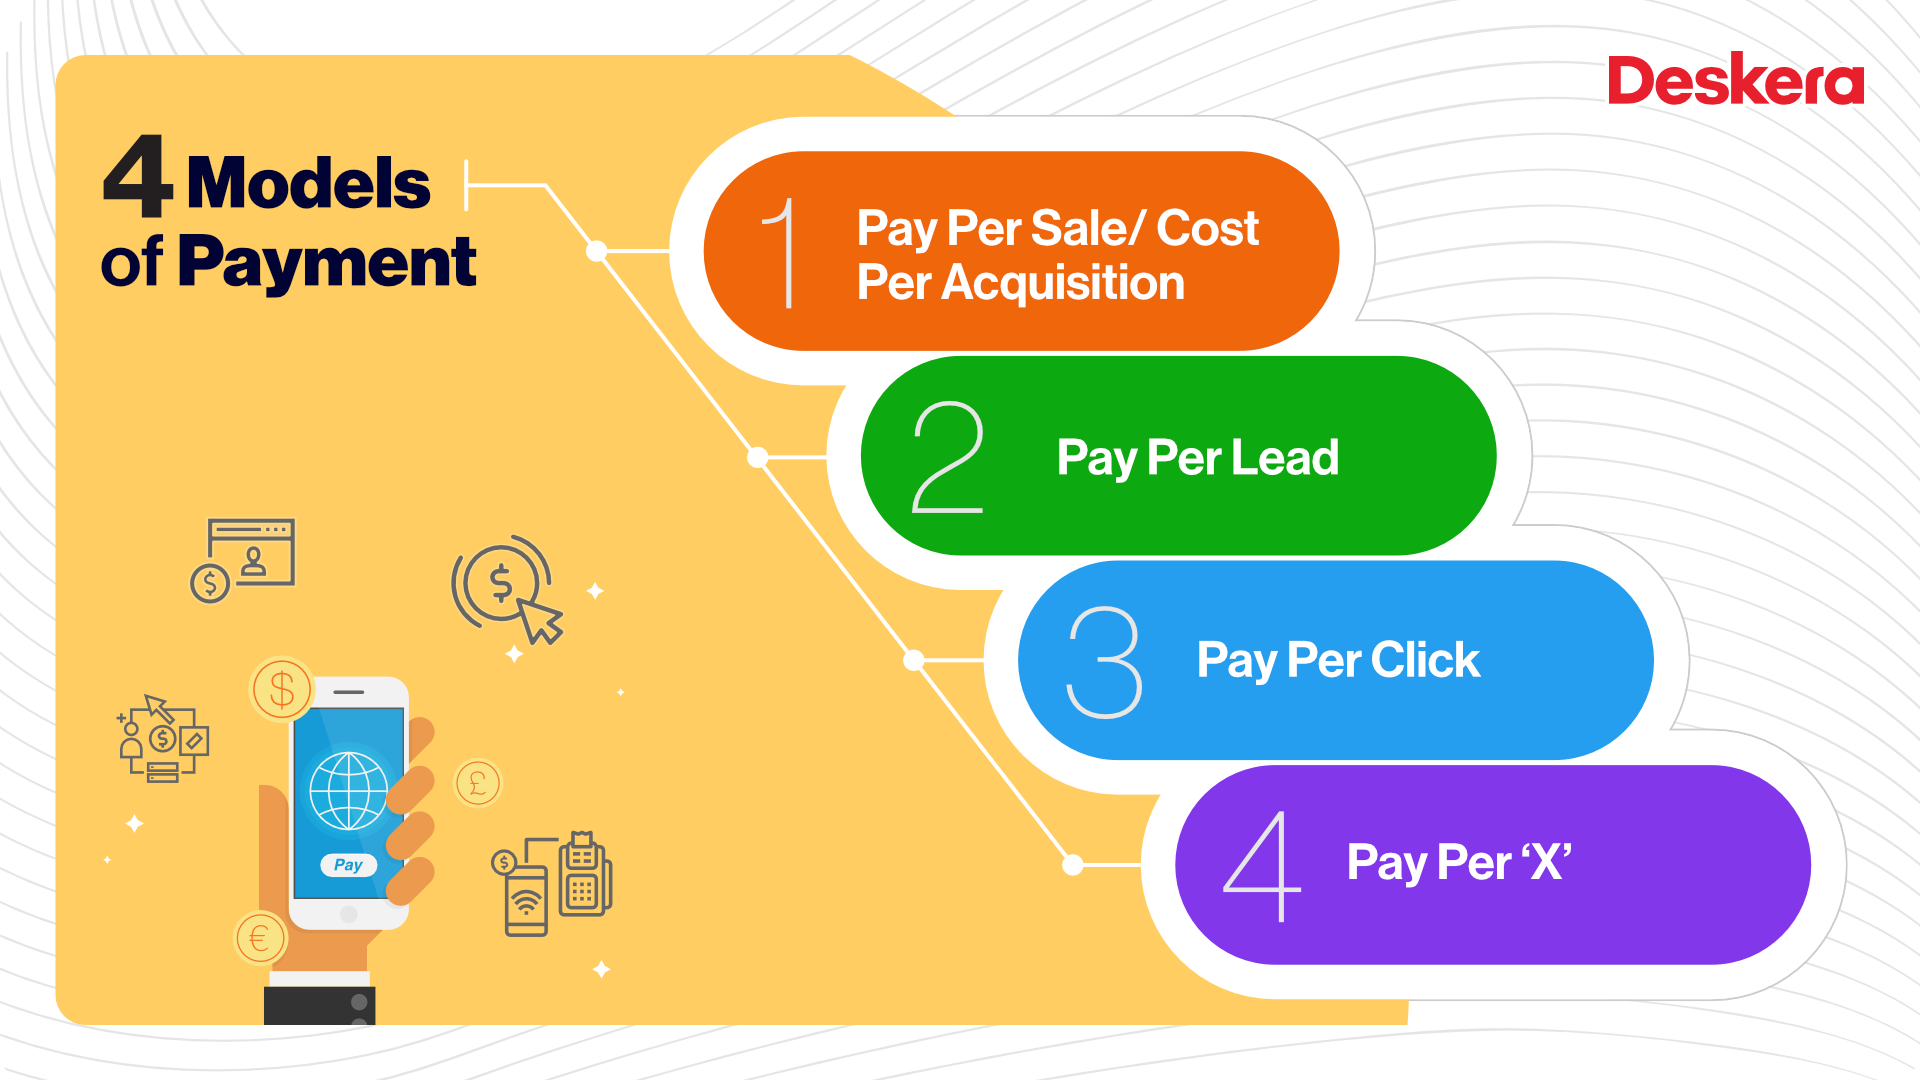 What are the Four Most Common Models of Payment Used in Performance Marketing?